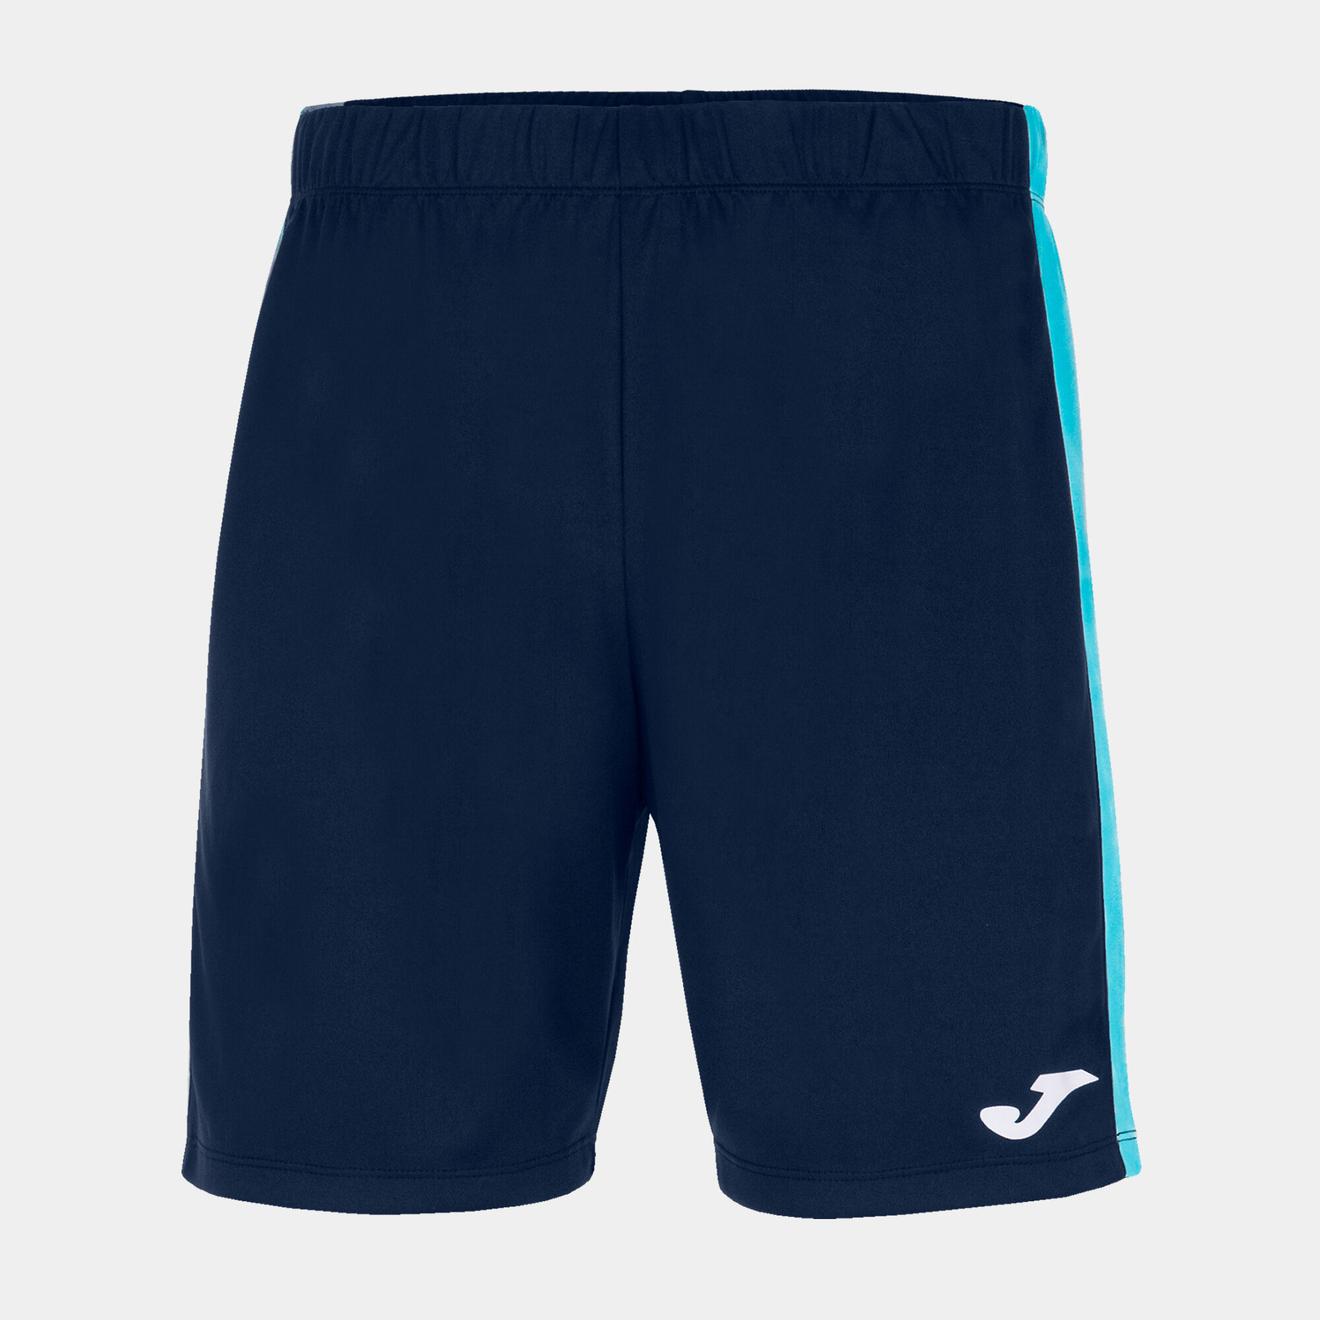 Shorts man Maxi navy blue fluorescent turquoise offers at £10.35 in Joma